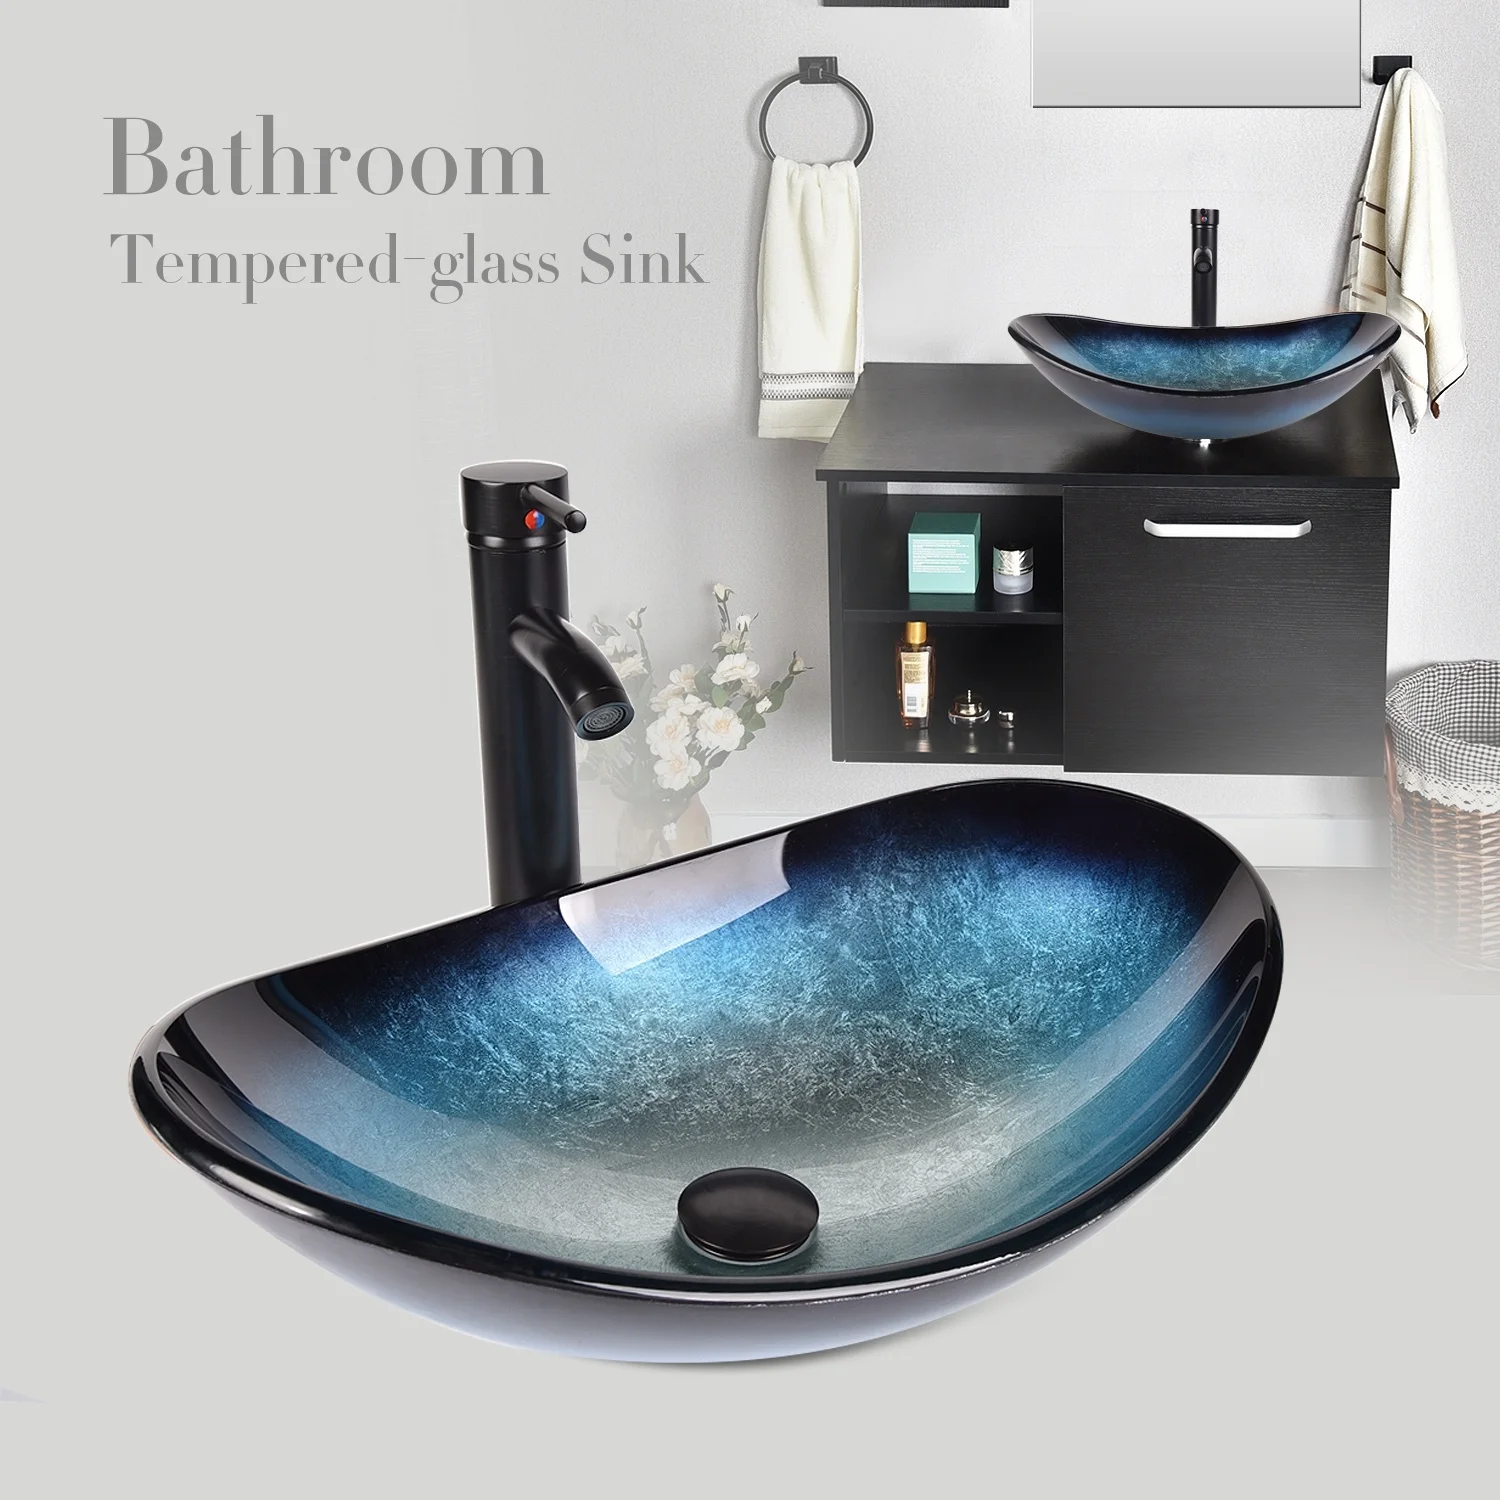 US Round Bathroom Black Tempered Glass Basin Bowl Vessel Sink Mixer Tap Combo 